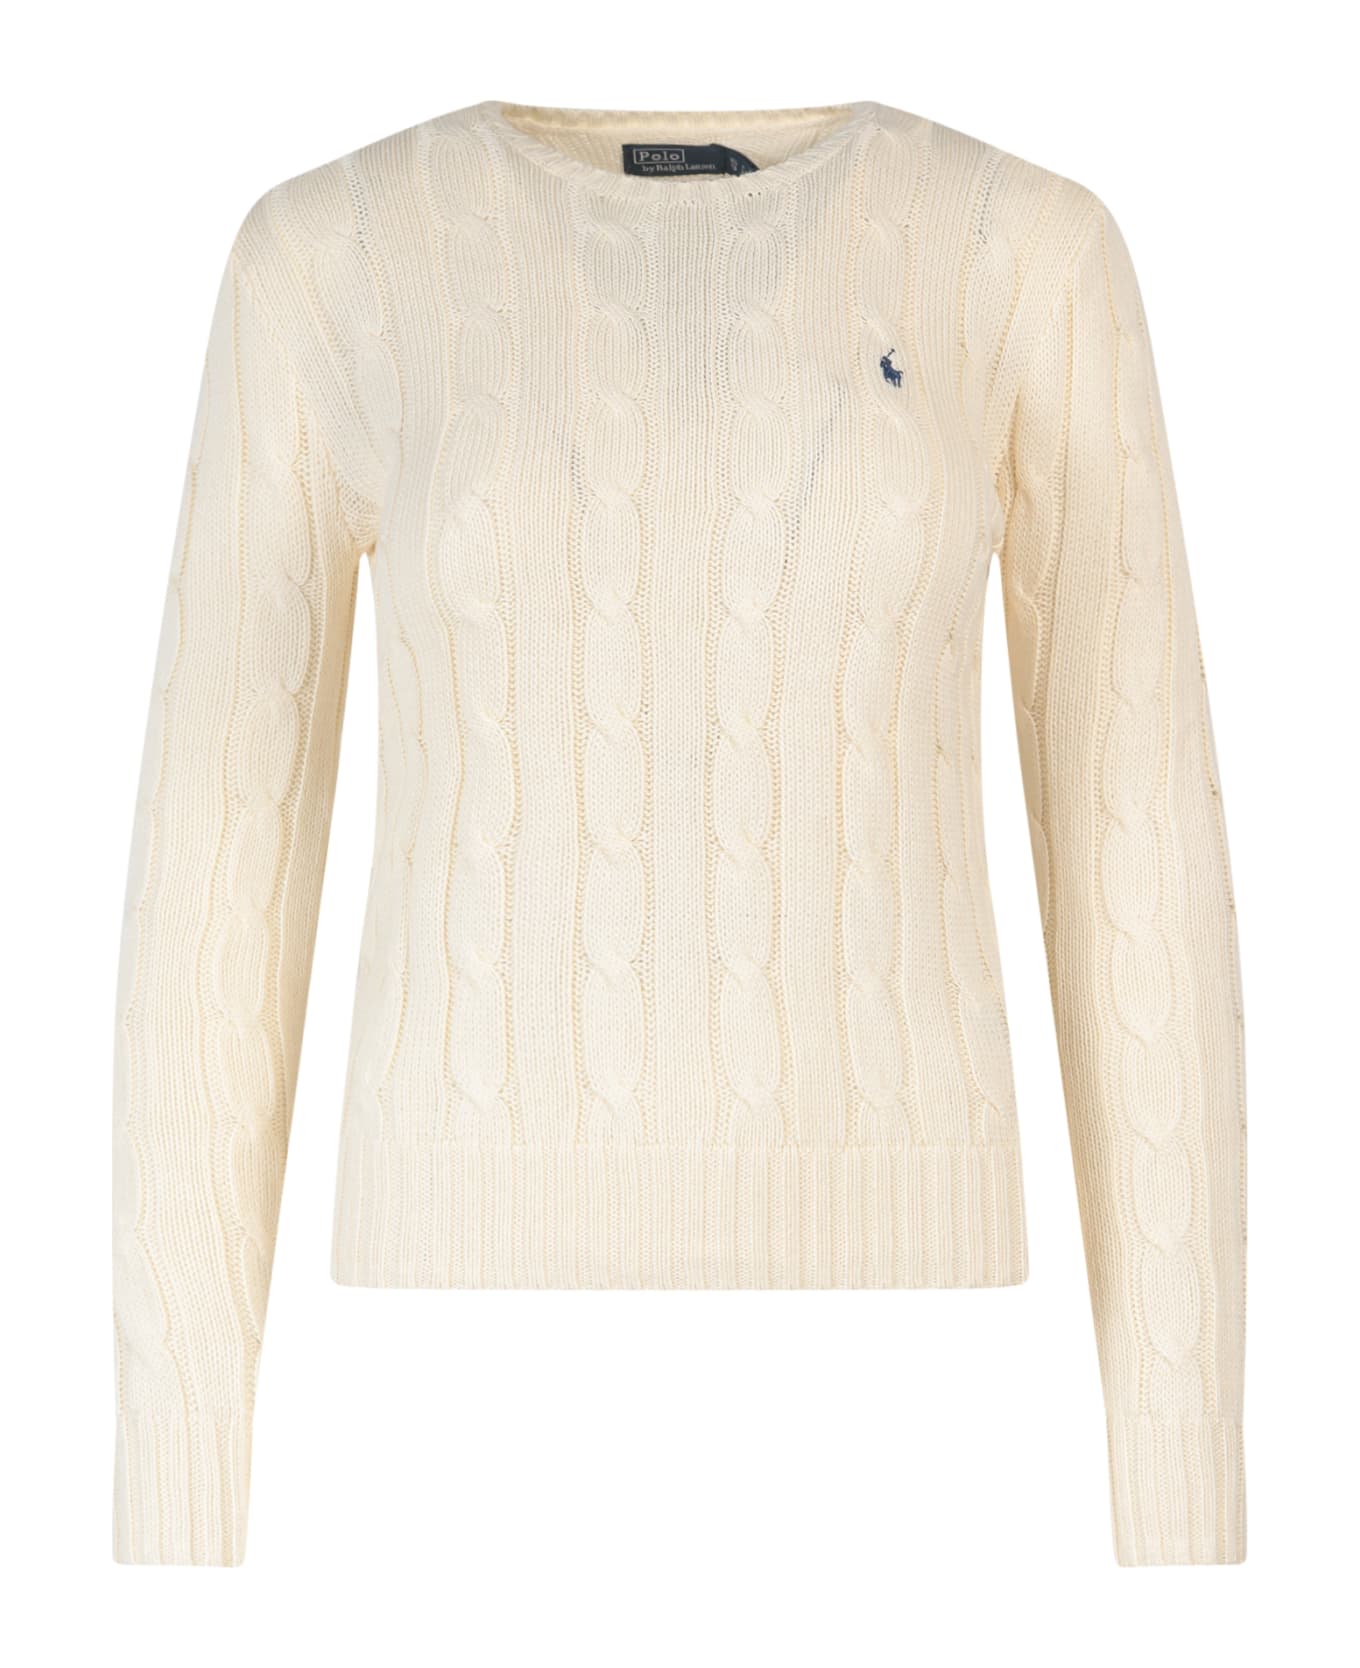 Ralph Lauren Cable Knit Sweater - Prchmnt